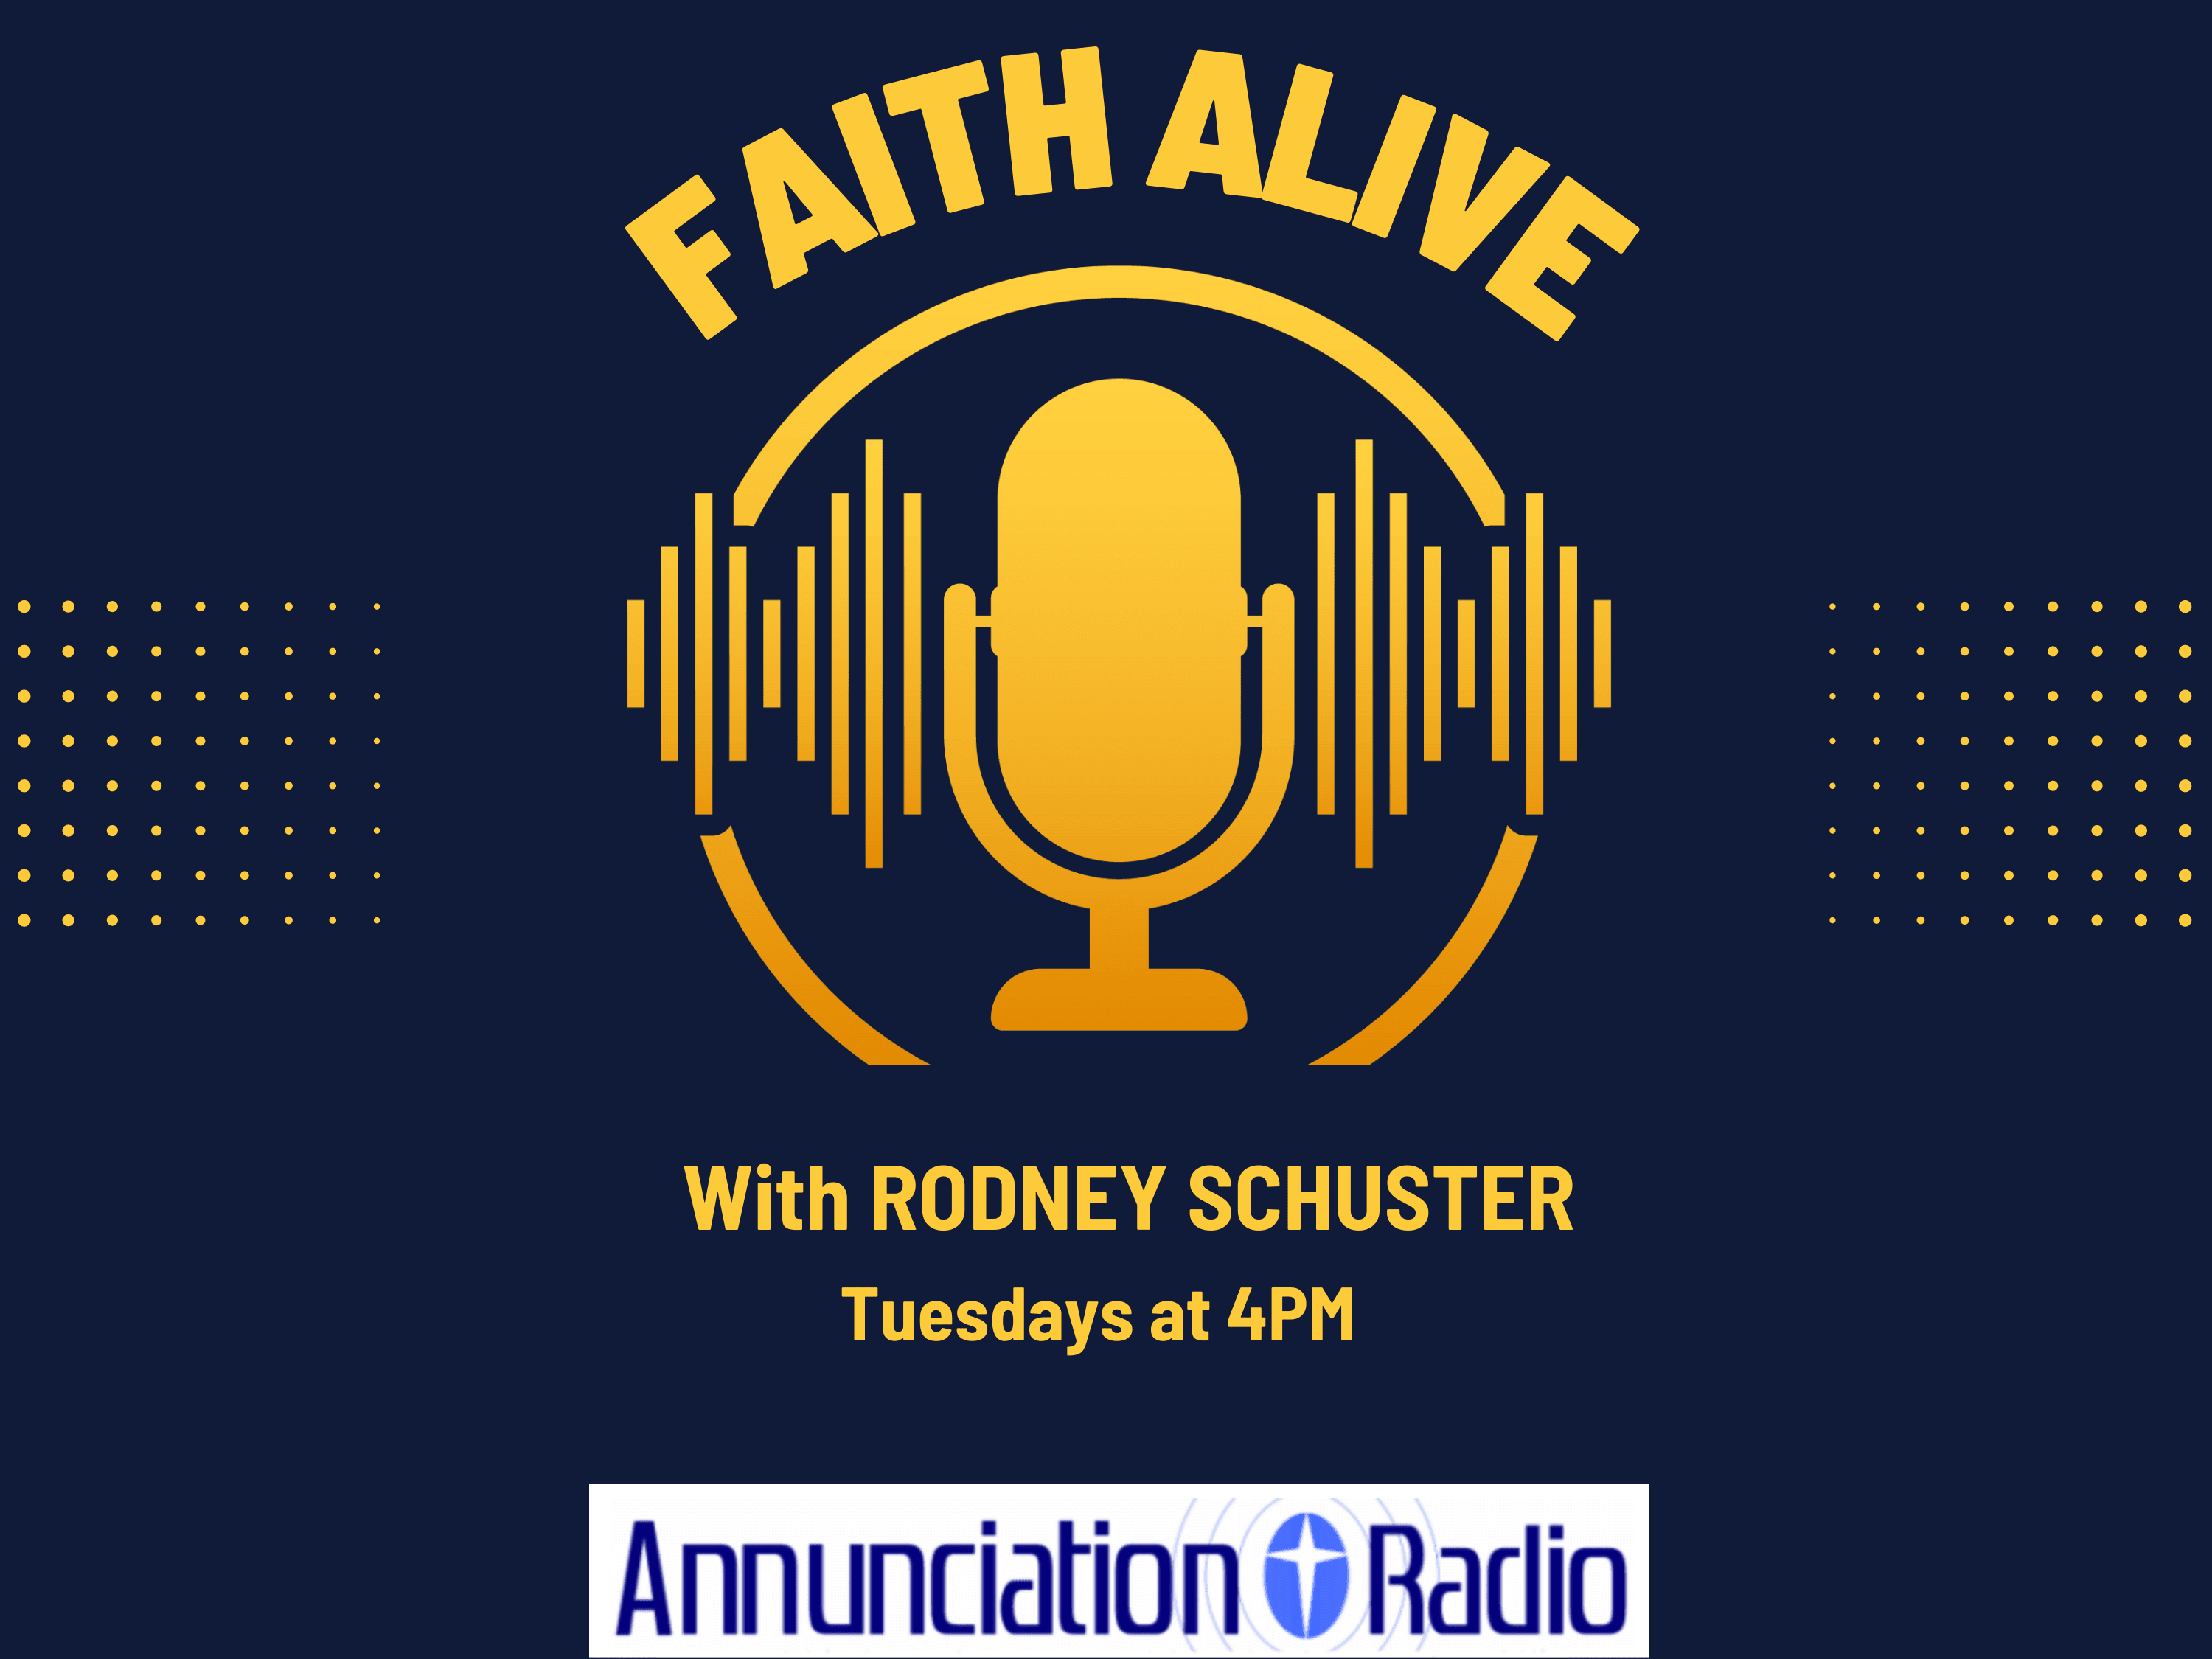 Catholic Charities hour-long Faith Alive program airs weekly on Annunciation Radio on Tuesdays at 4 p.m. and is re-broadcast at 3 p.m. on Saturdays.